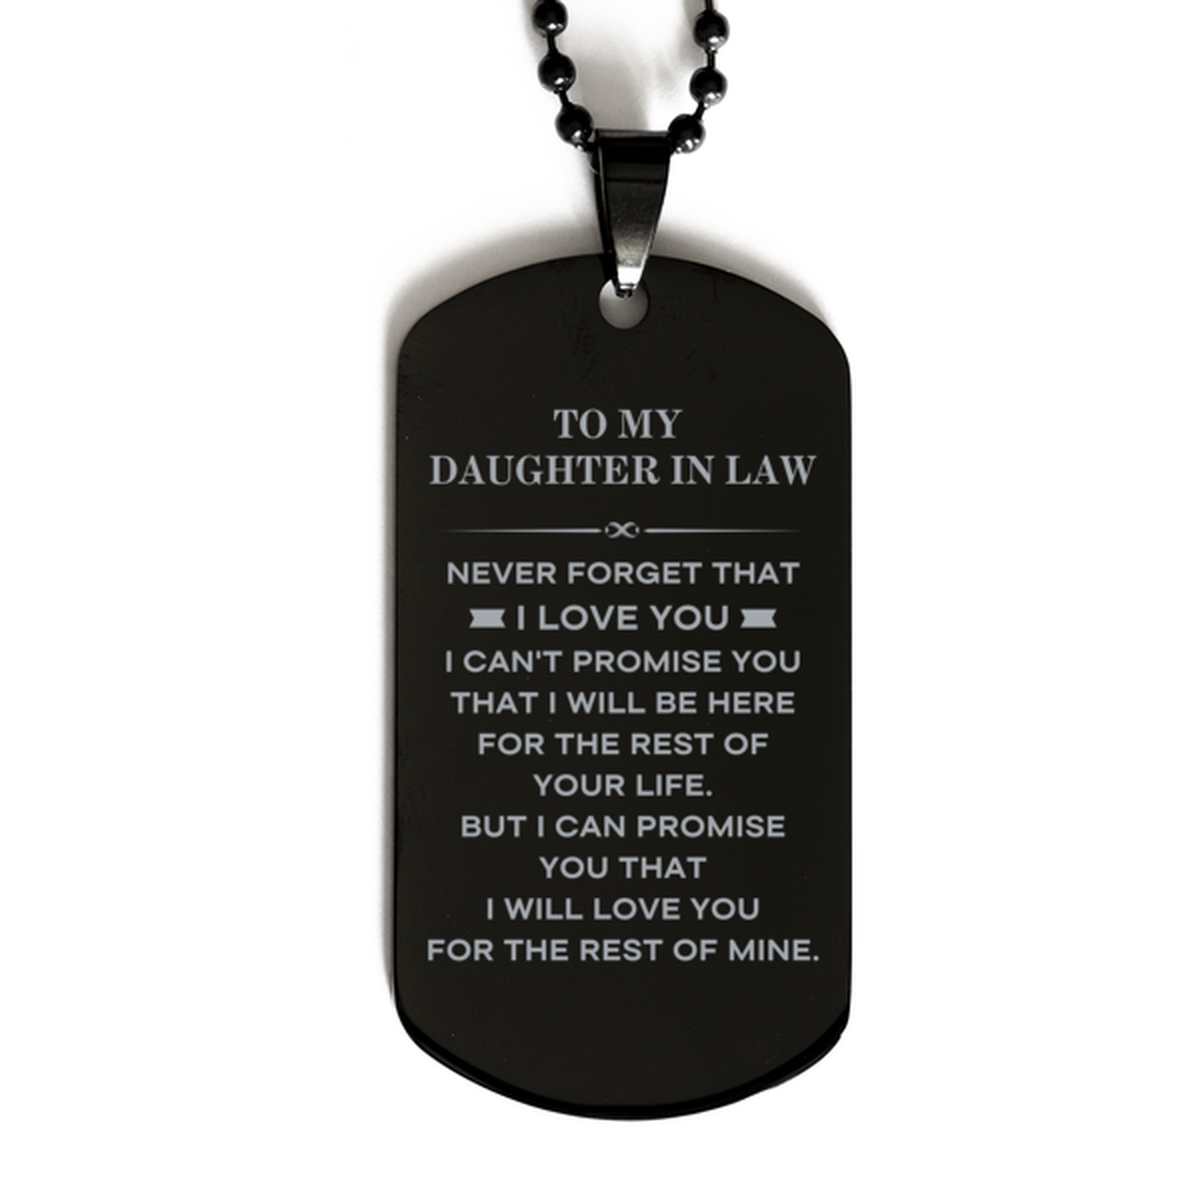 To My Daughter In Law Gifts, I will love you for the rest of mine, Love Daughter In Law Dog Tag Necklace, Birthday Christmas Unique Black Dog Tag For Daughter In Law